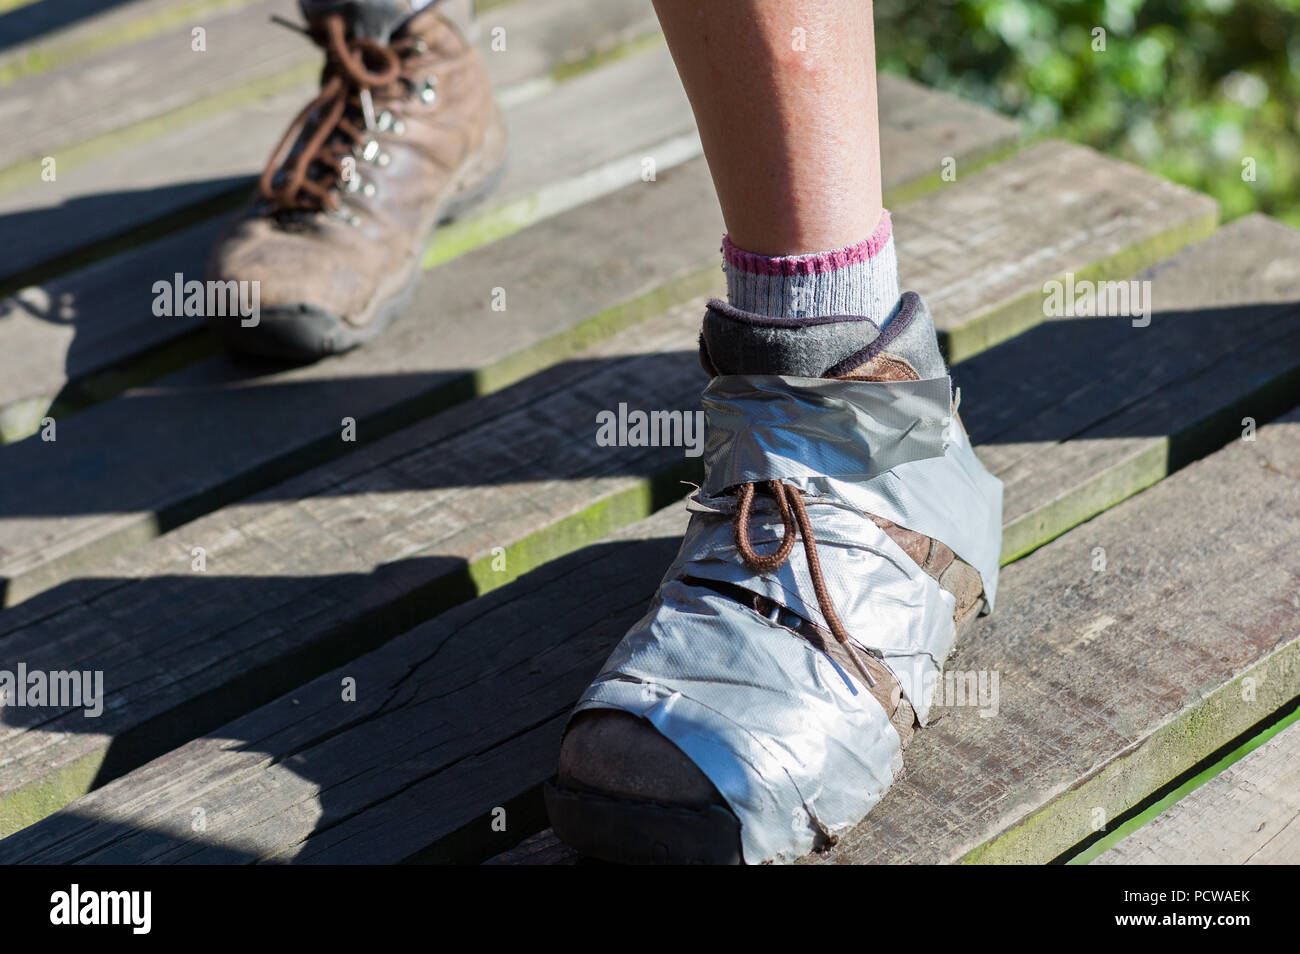 Hiking boot taped together with duct tape, Tsitsikamma Hiking Trail, Tsitsikamma Mountains, Eastern Cape Province, South Africa. Stock Photo